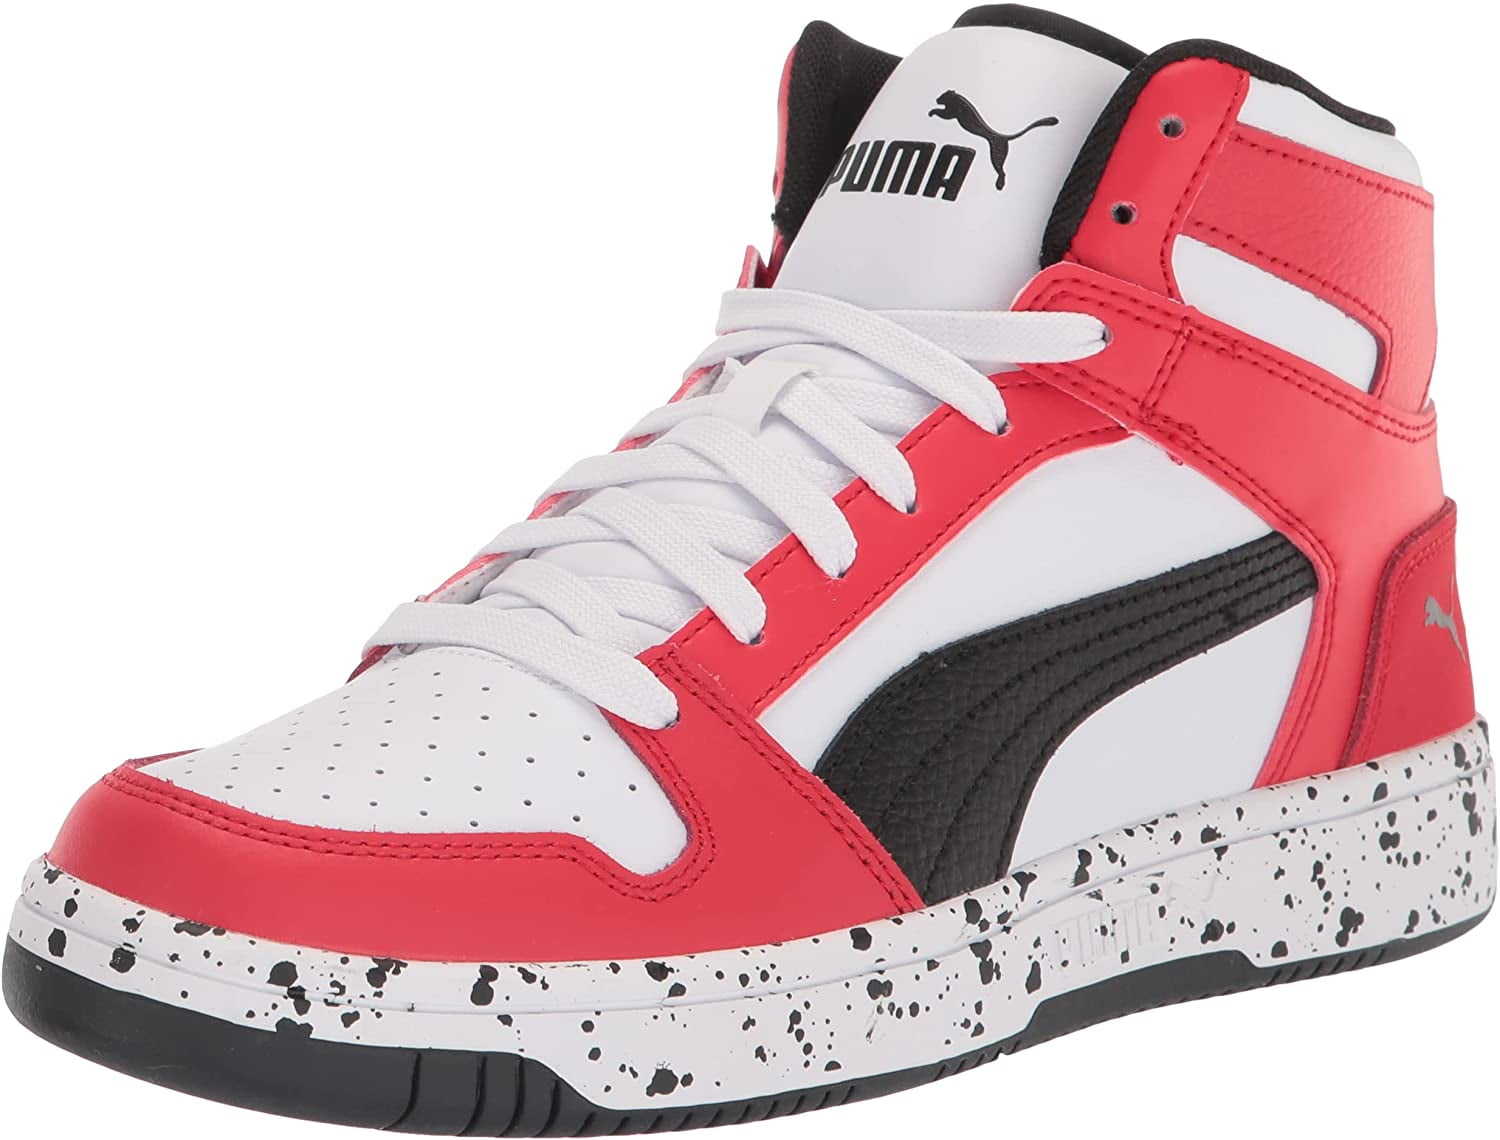 Aggregate 60+ puma high sneakers shoes